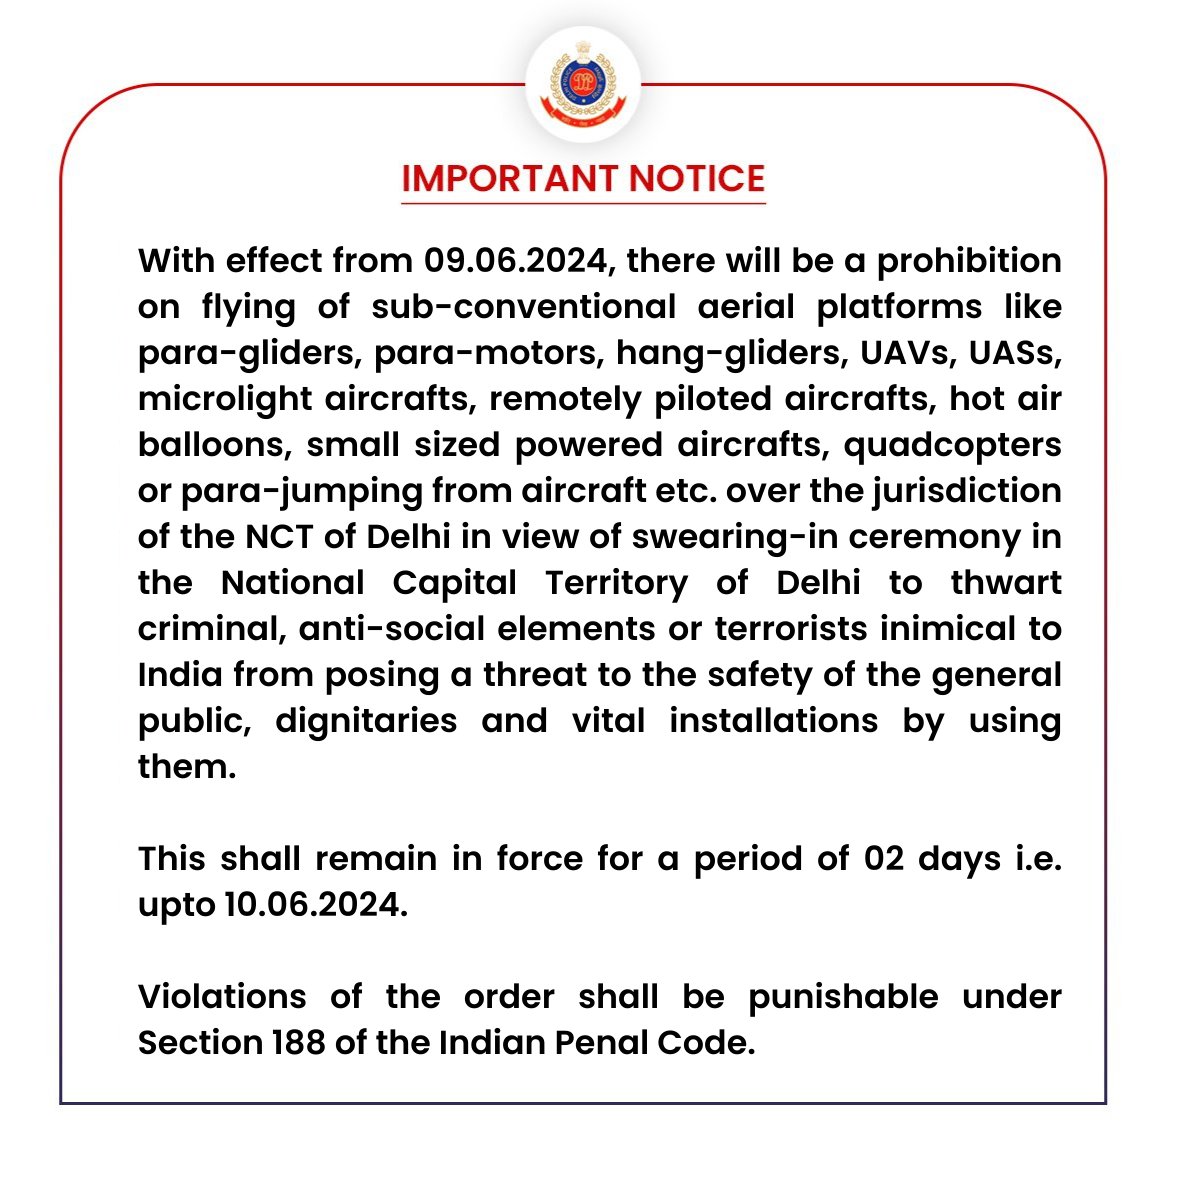 IMPORTANT NOTICE regarding No-Fly Zone/Prohibition of certain flying objects in the NCT of Delhi in view of swearing-in ceremony. @CPDelhi #DelhiPoliceUpdates